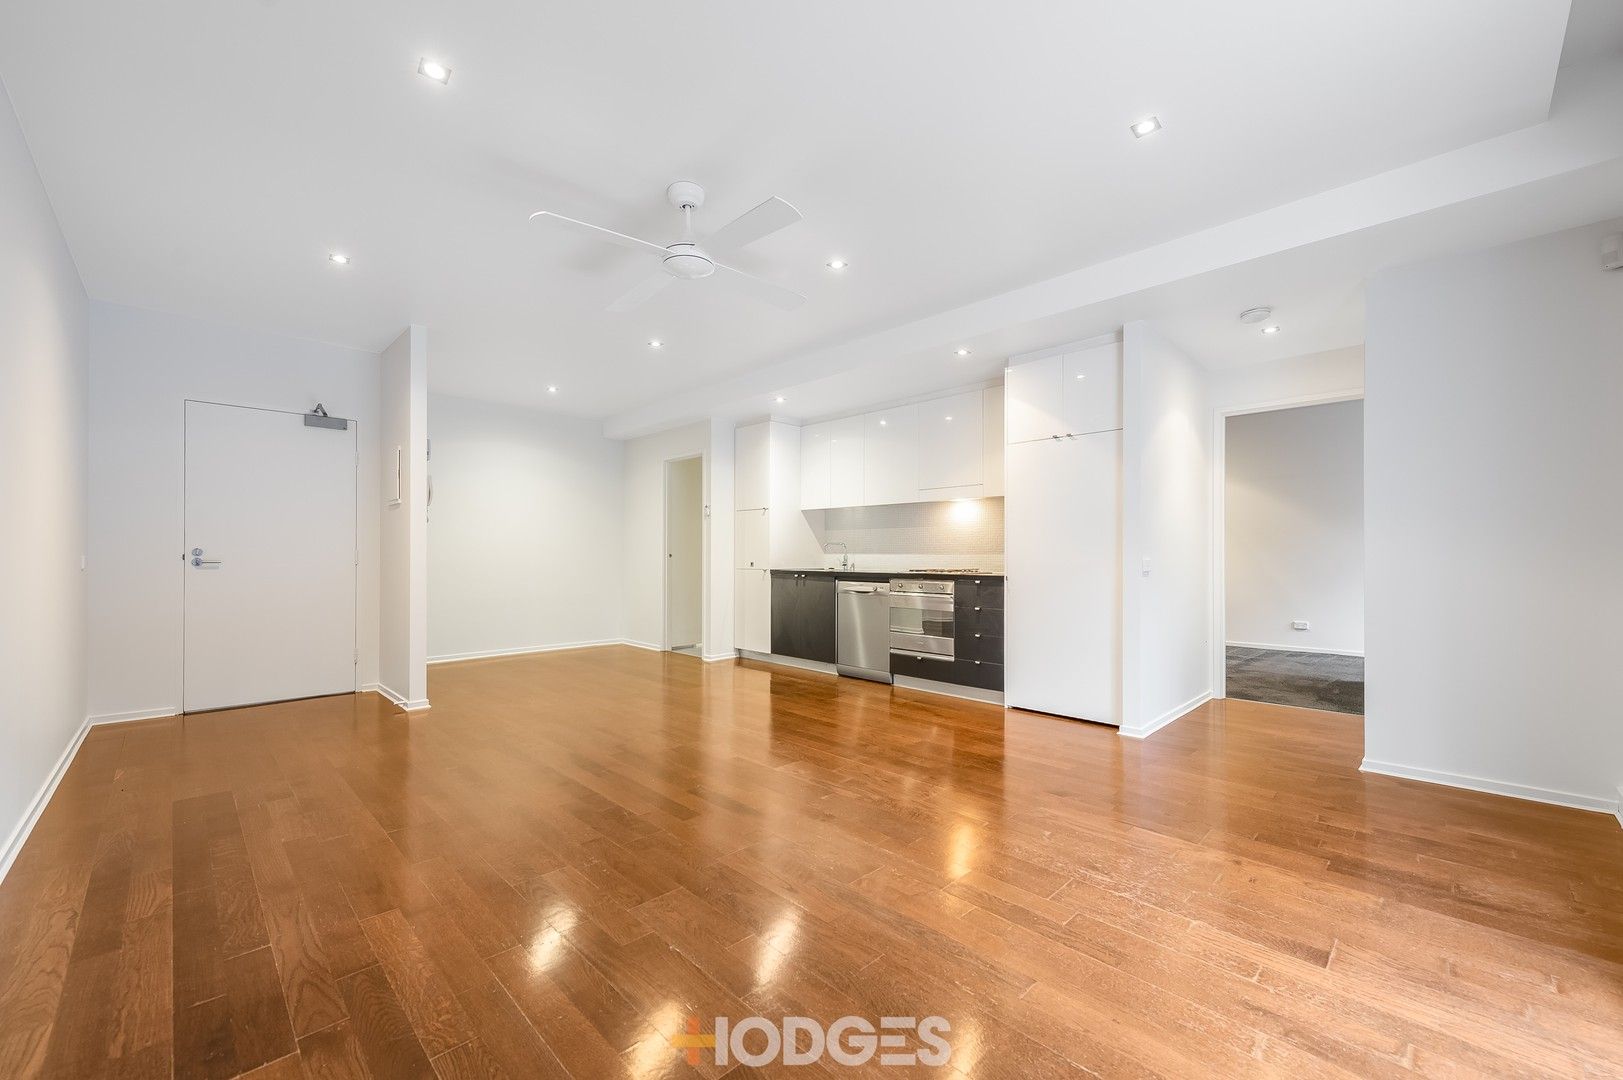 2 bedrooms Apartment / Unit / Flat in 28/73 River Street RICHMOND VIC, 3121